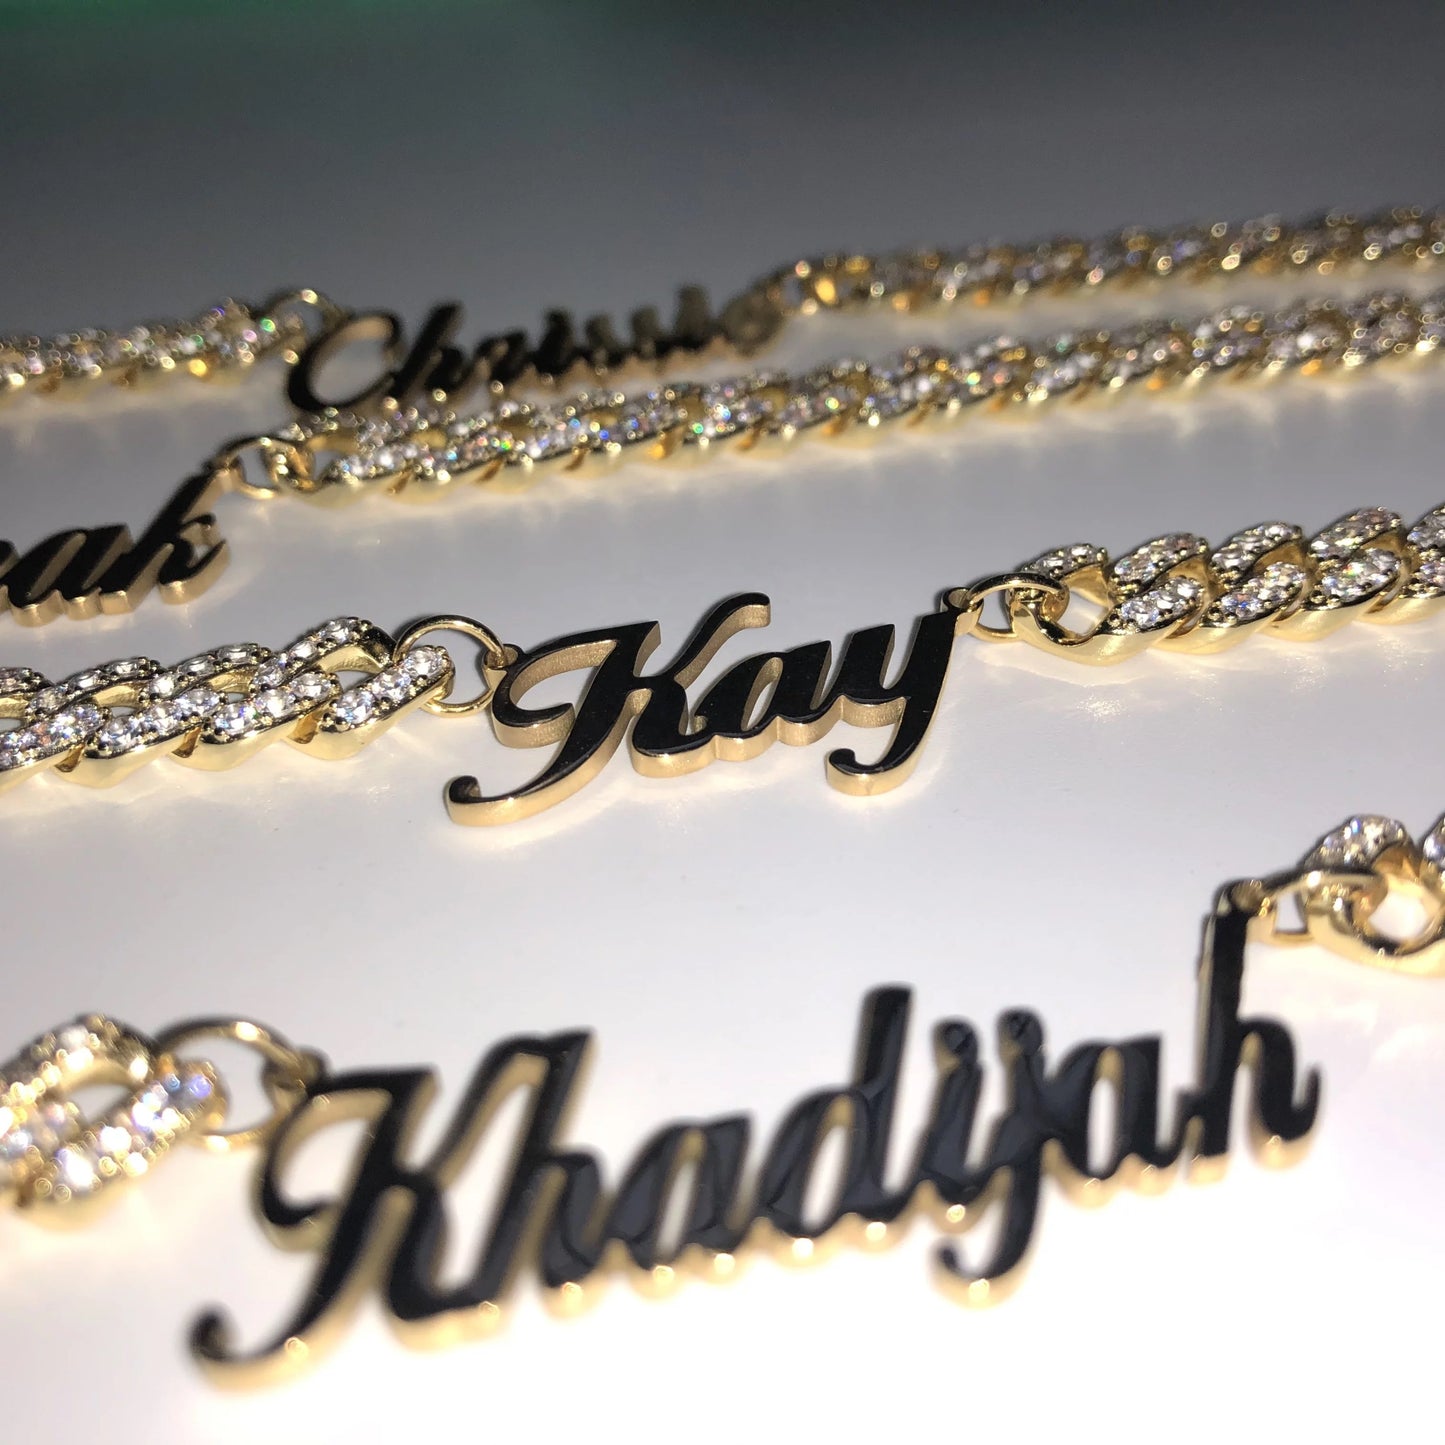 Crystal Dainty Cuban Name Plate Necklace